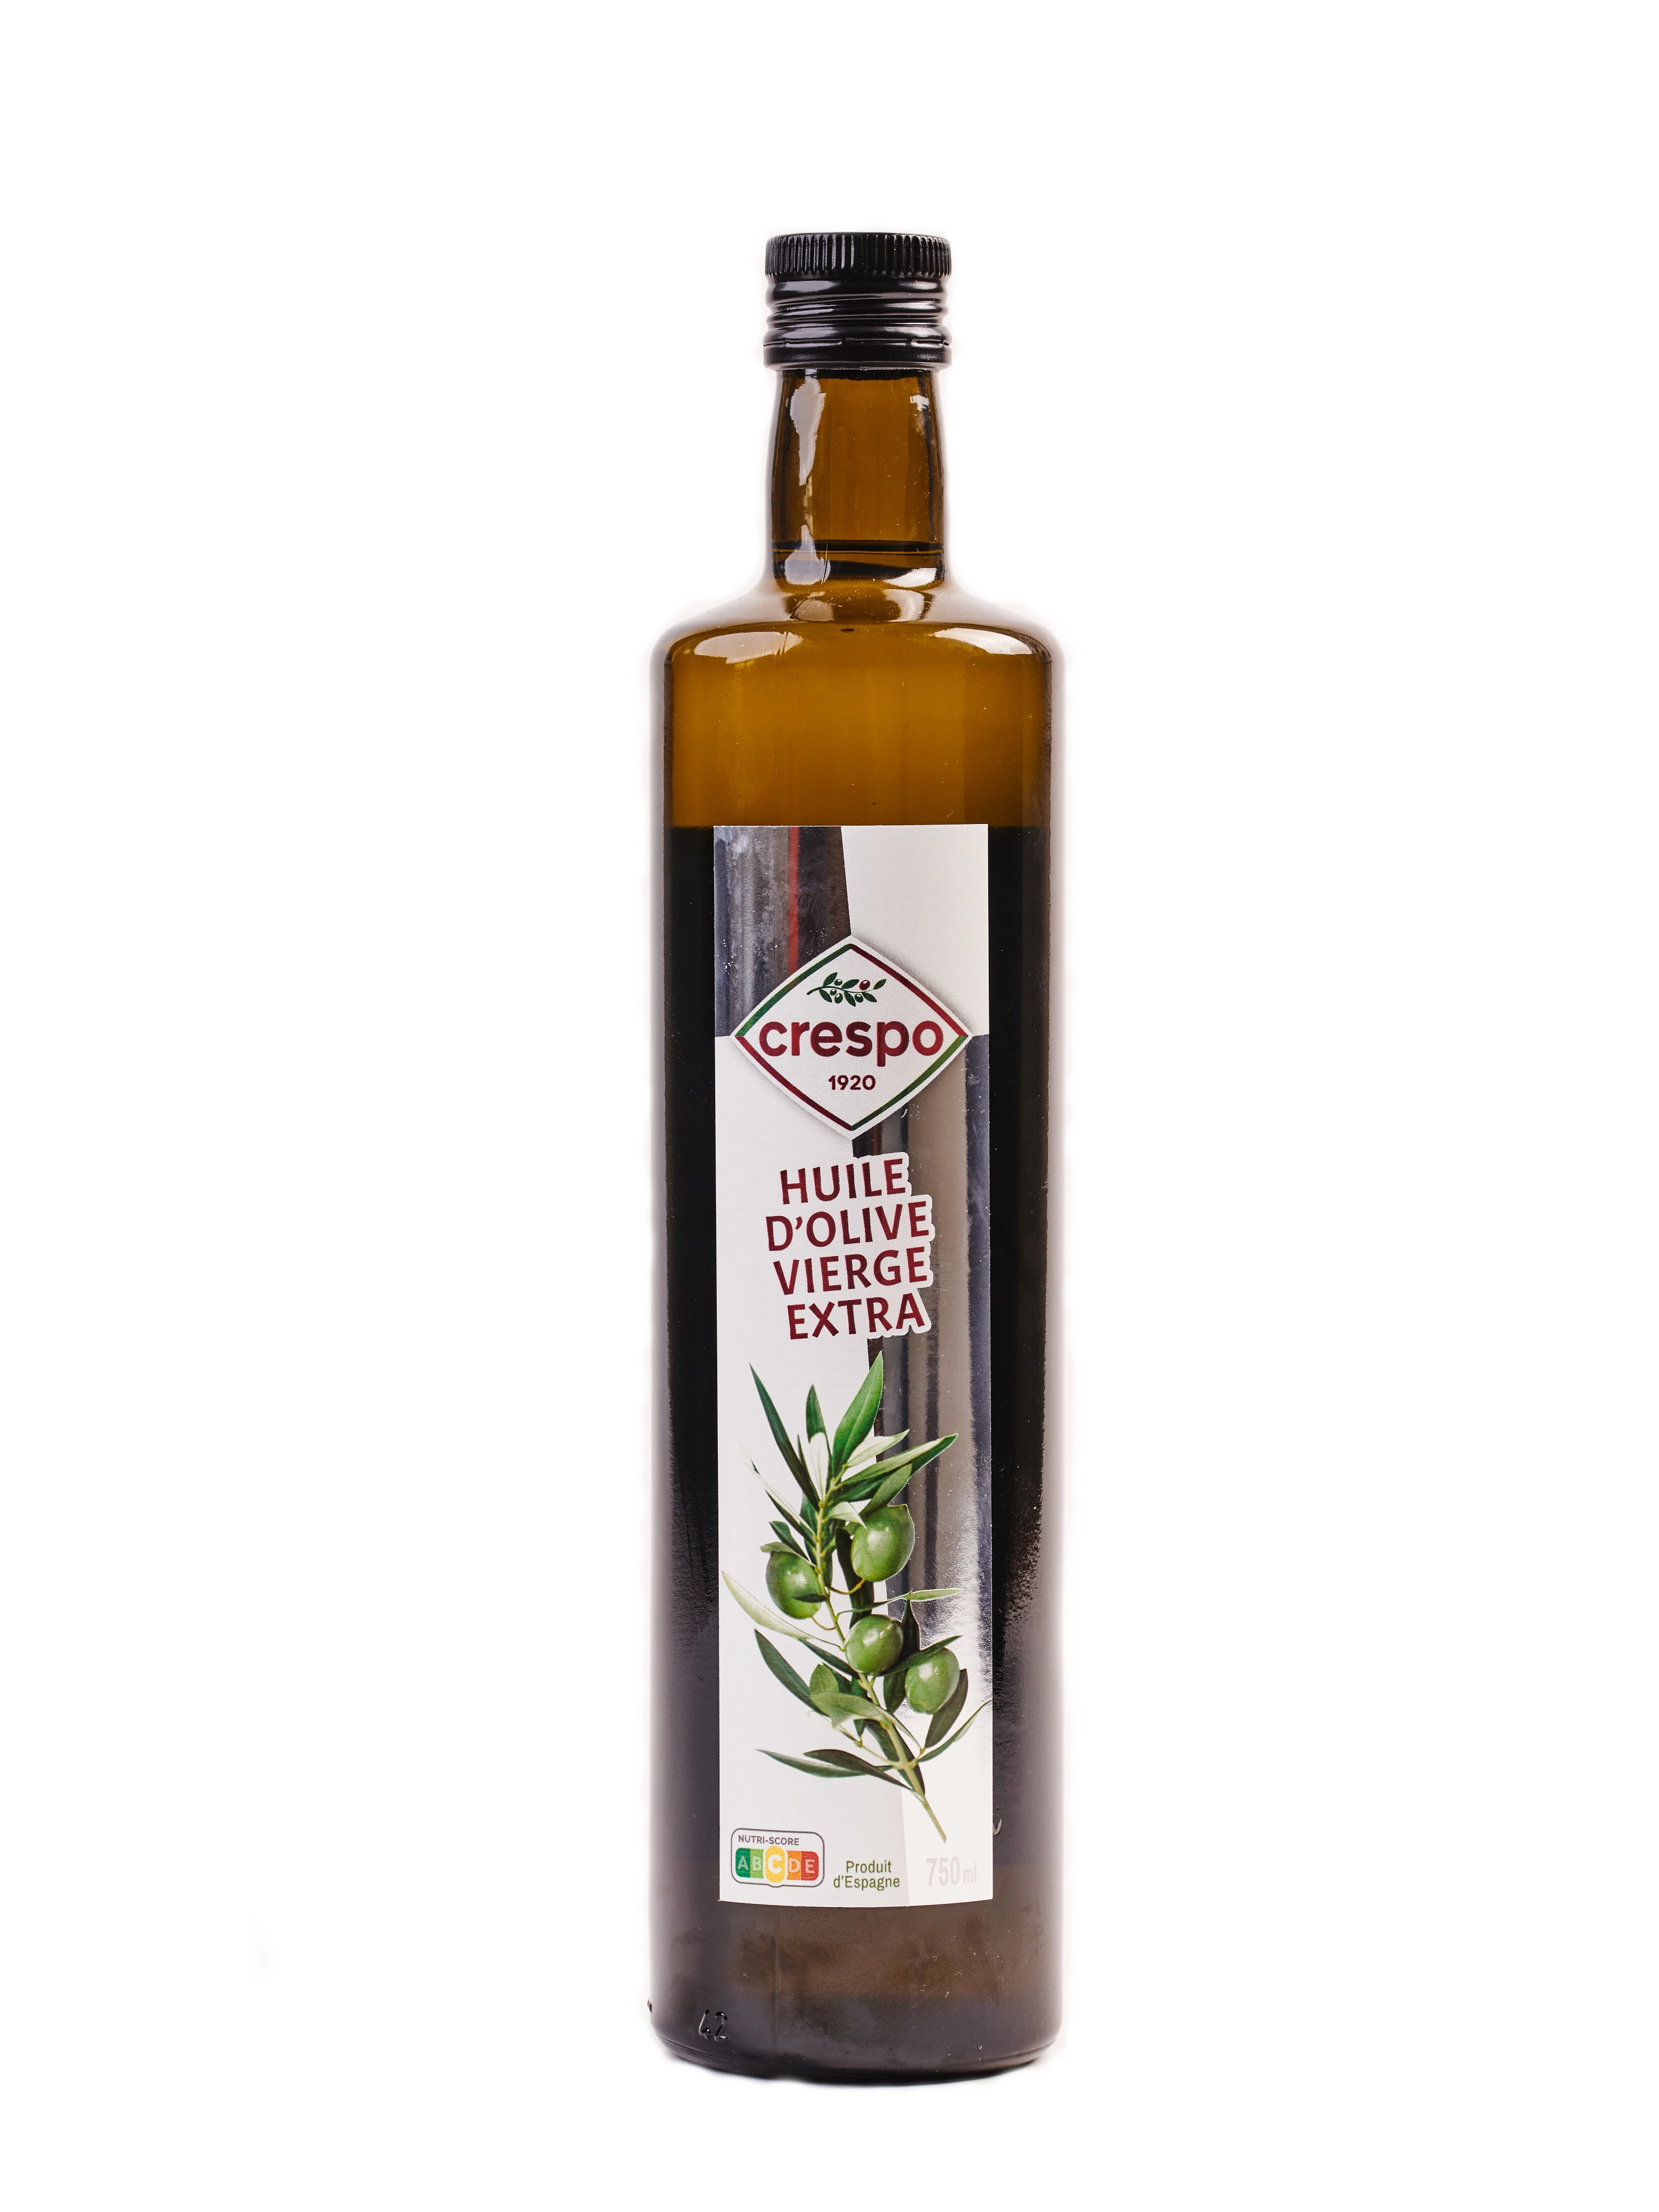 Huile d'olive vierge extra 75cL - CRESPO